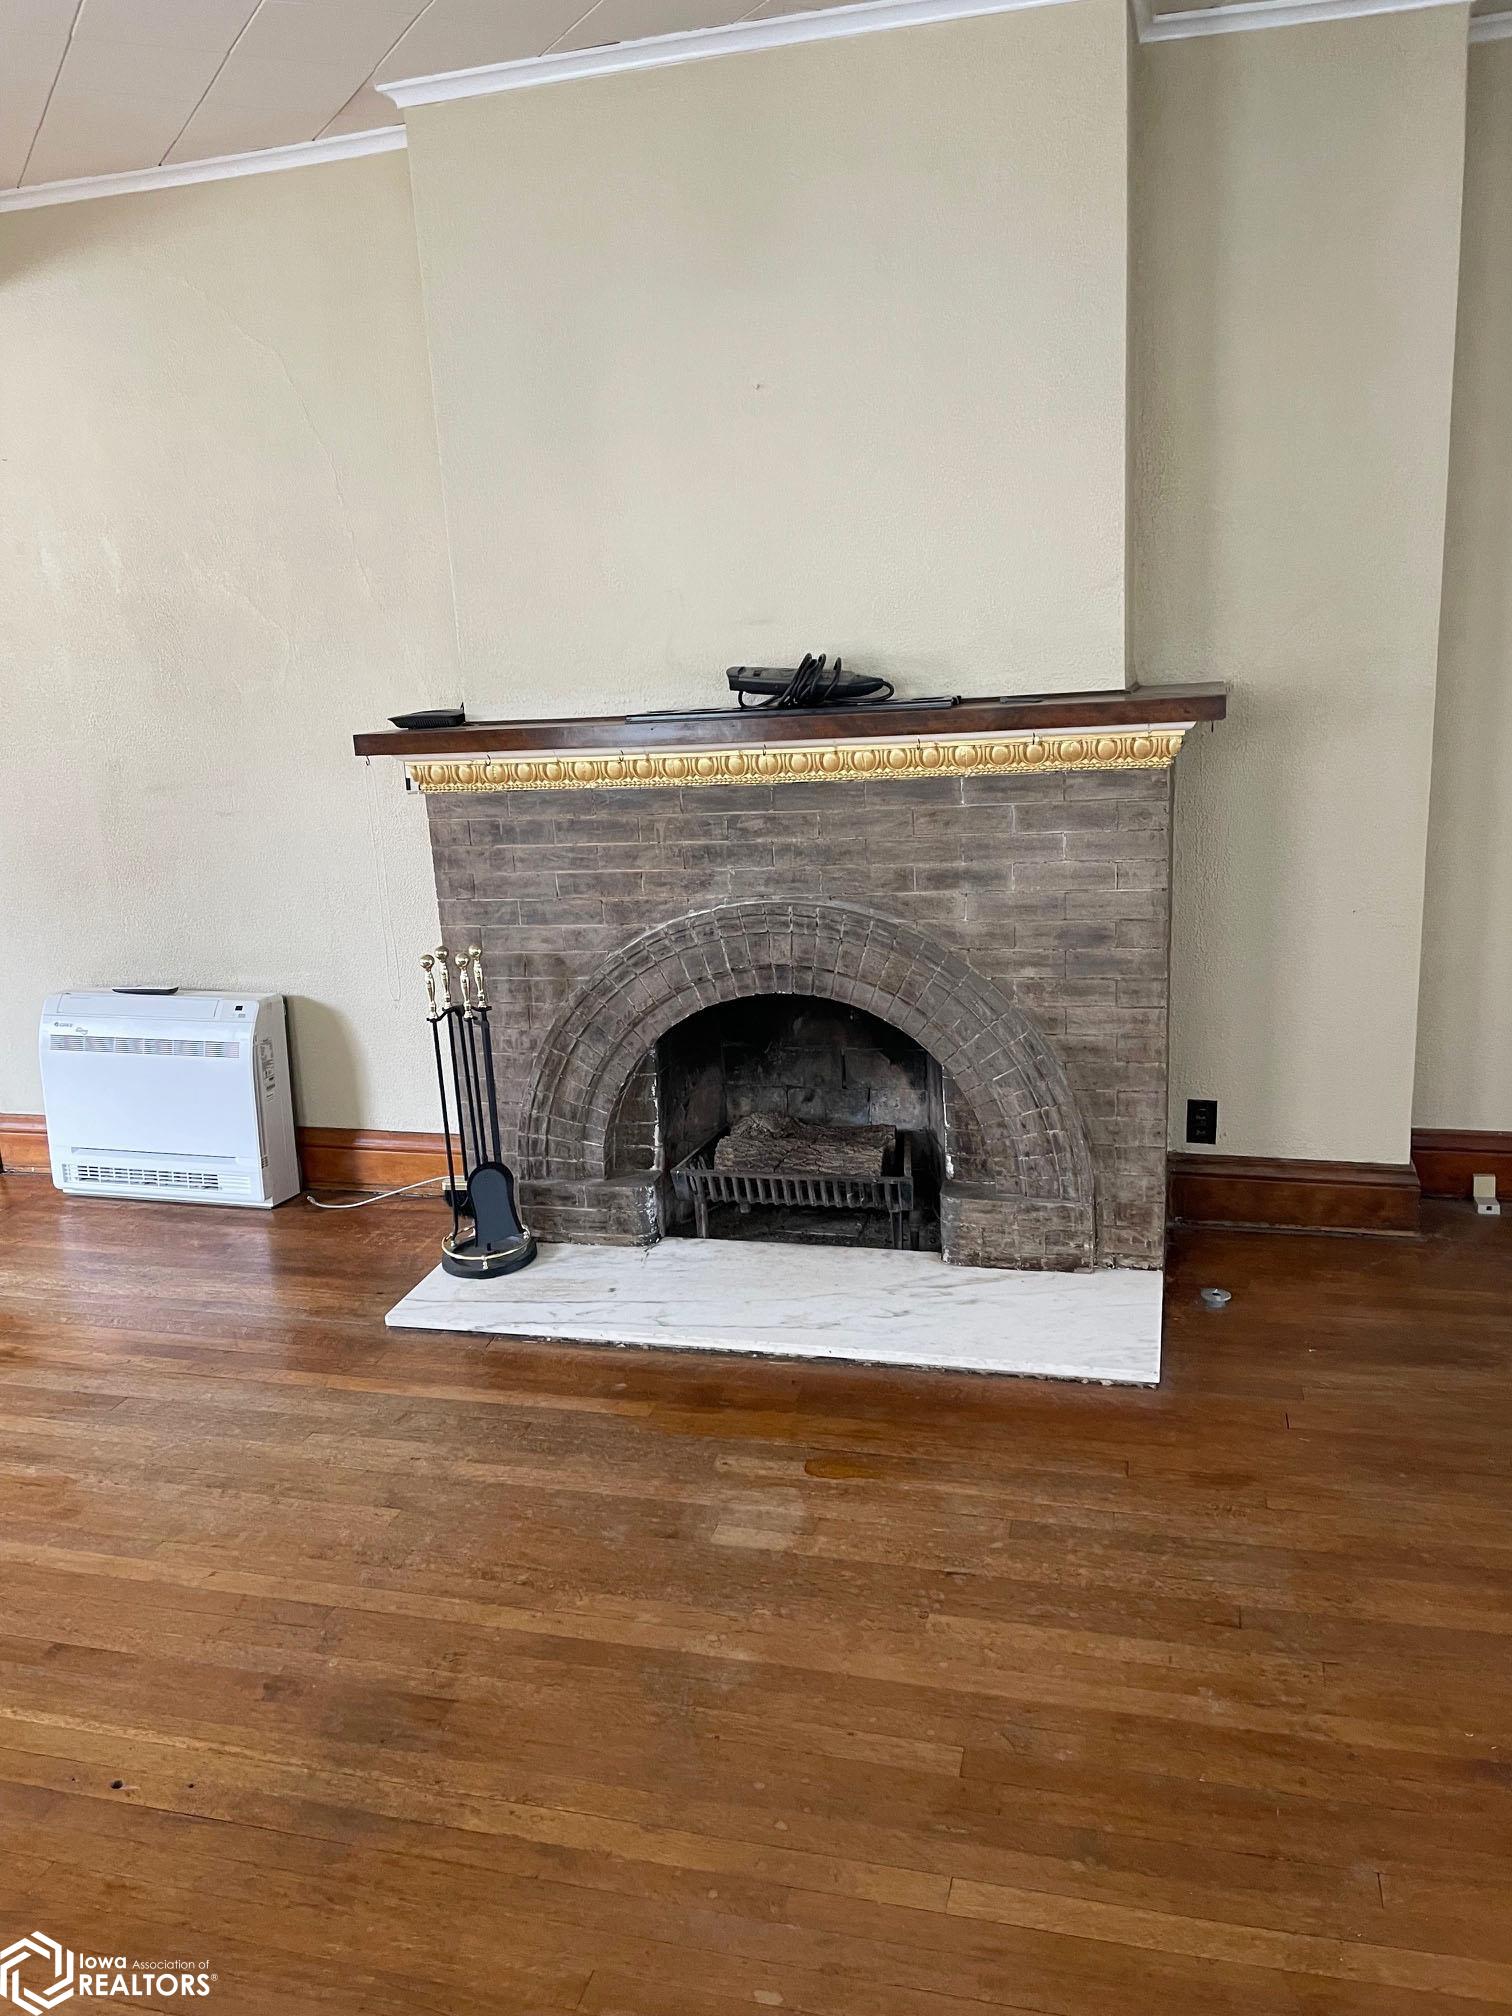 Another view of the wood burning fireplace located in the formal sitting room.